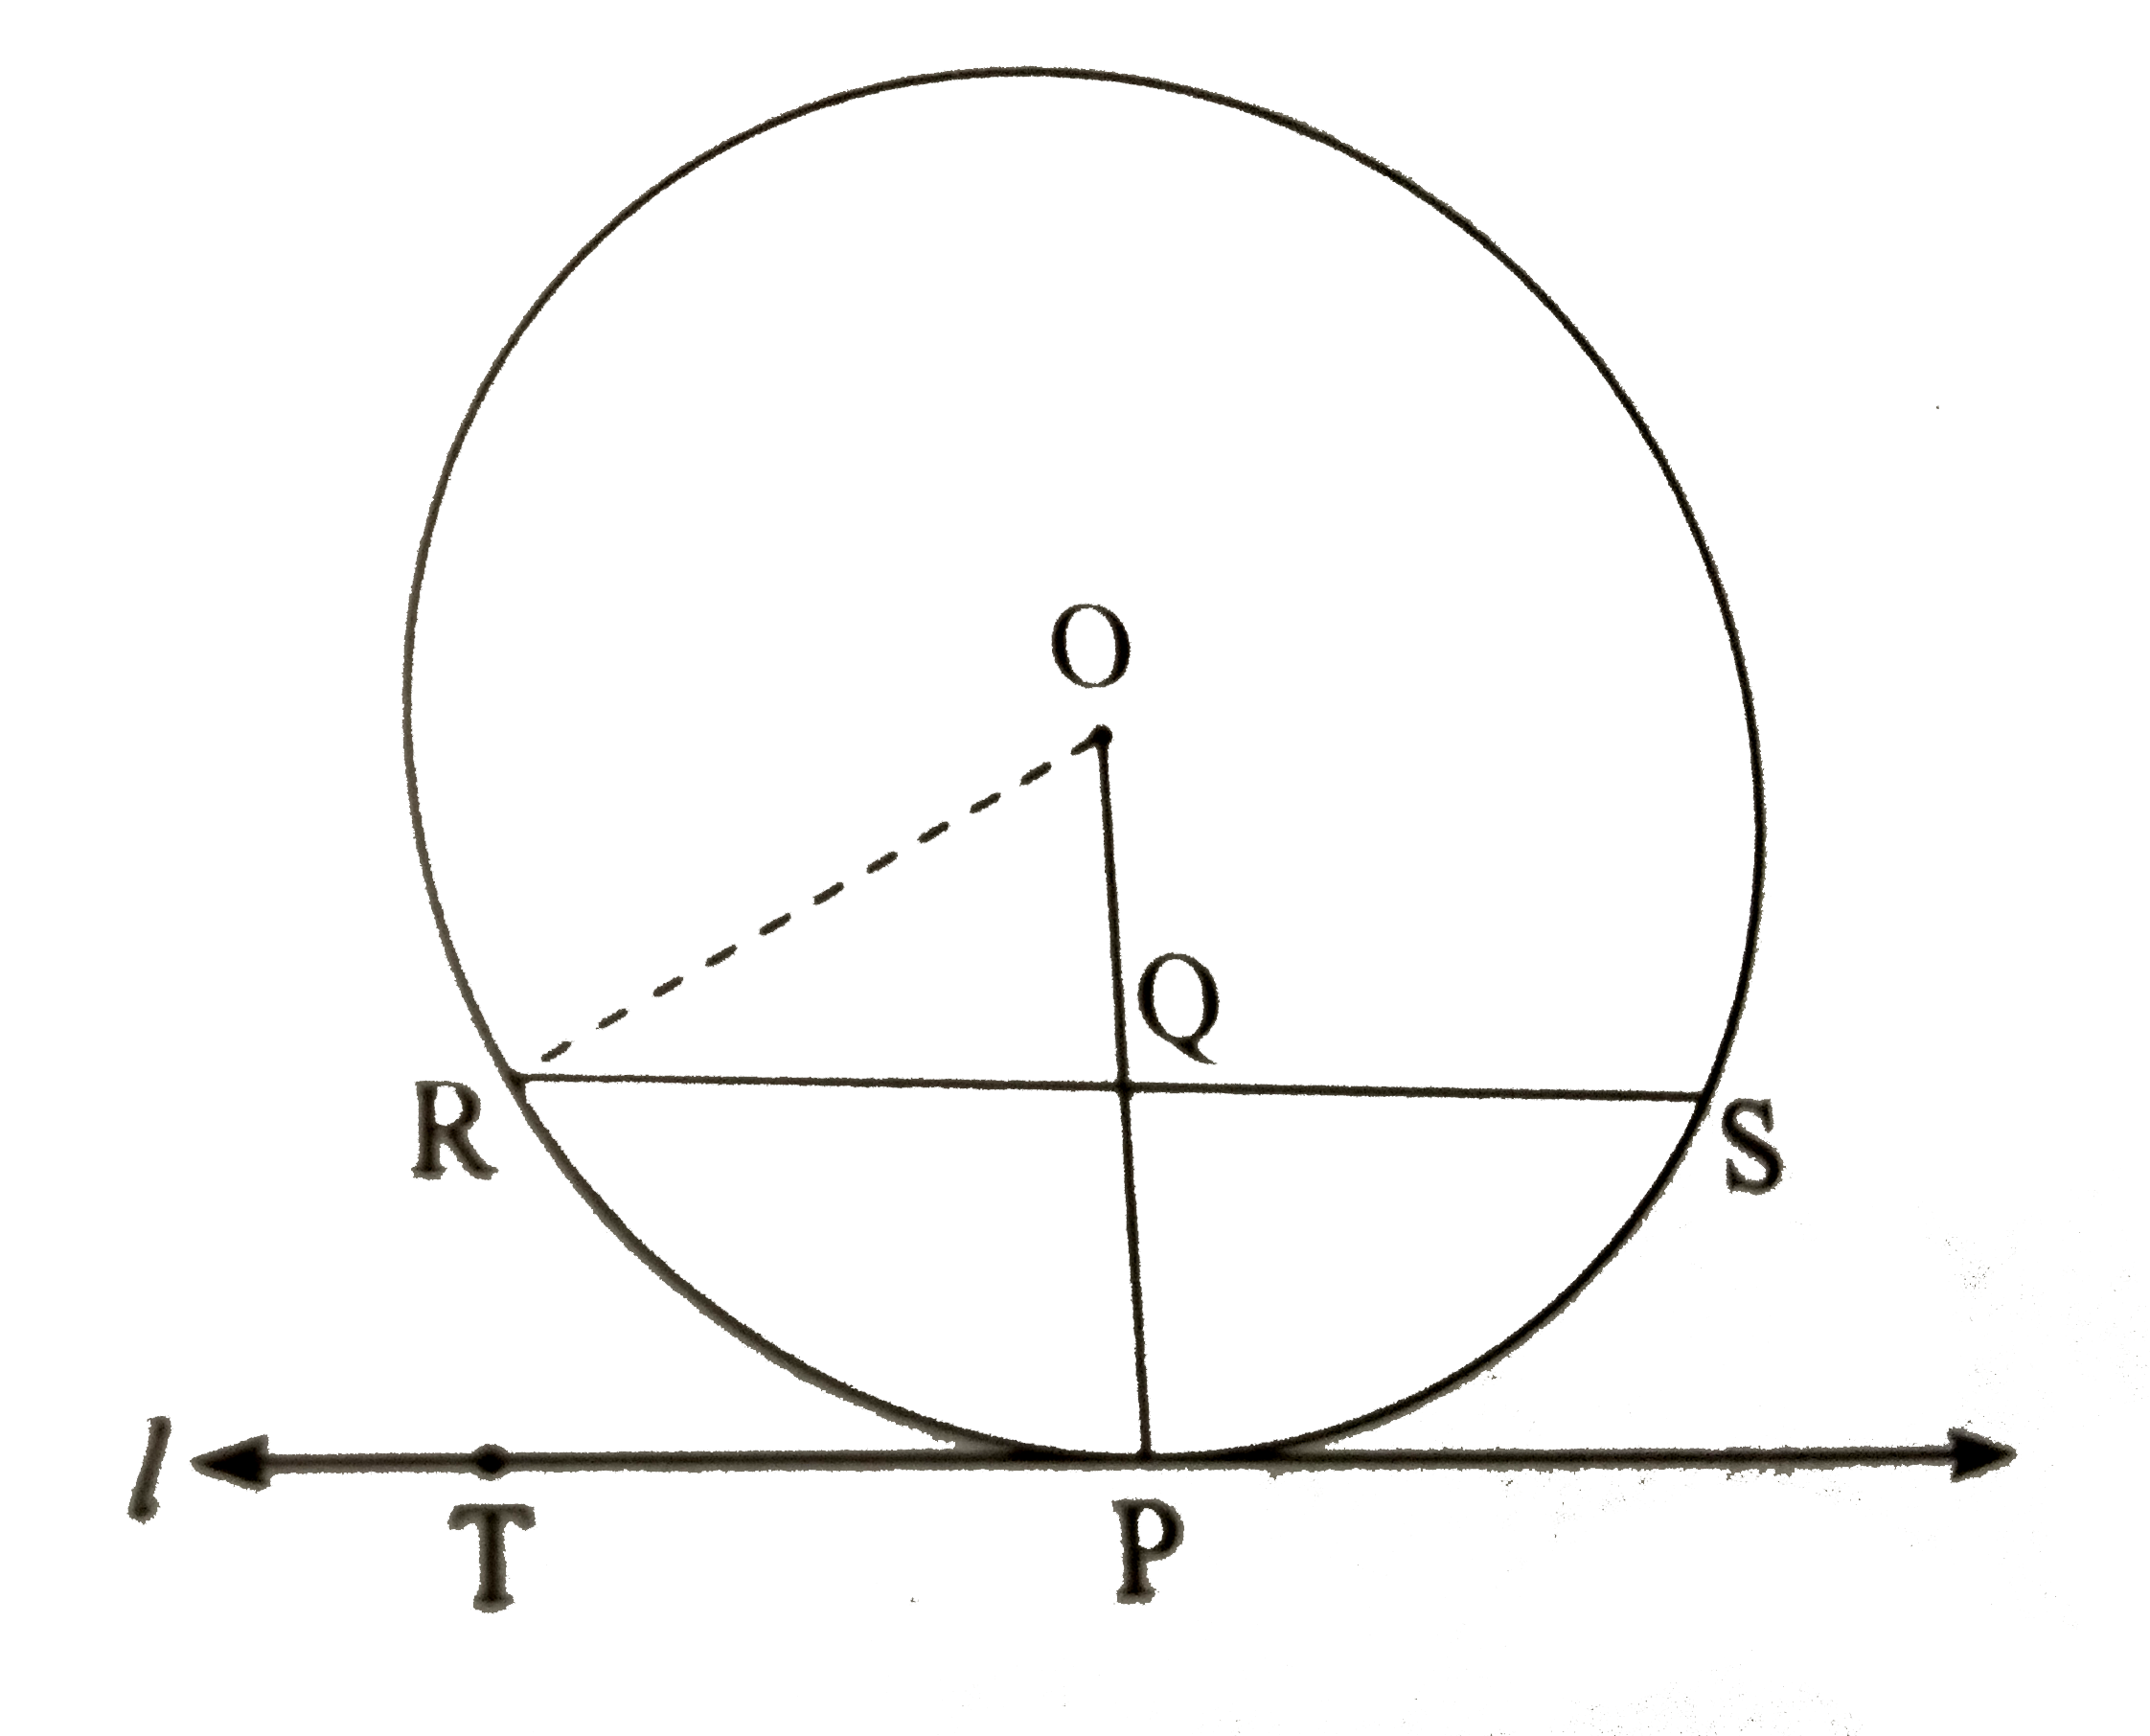 In the figure, line l touches the circle with centre O at point P. Q is the midpoint of radius OP. RS is a chord thorugh Q such that chords RS || line l. If RS = 12  , find the radius of the circle.